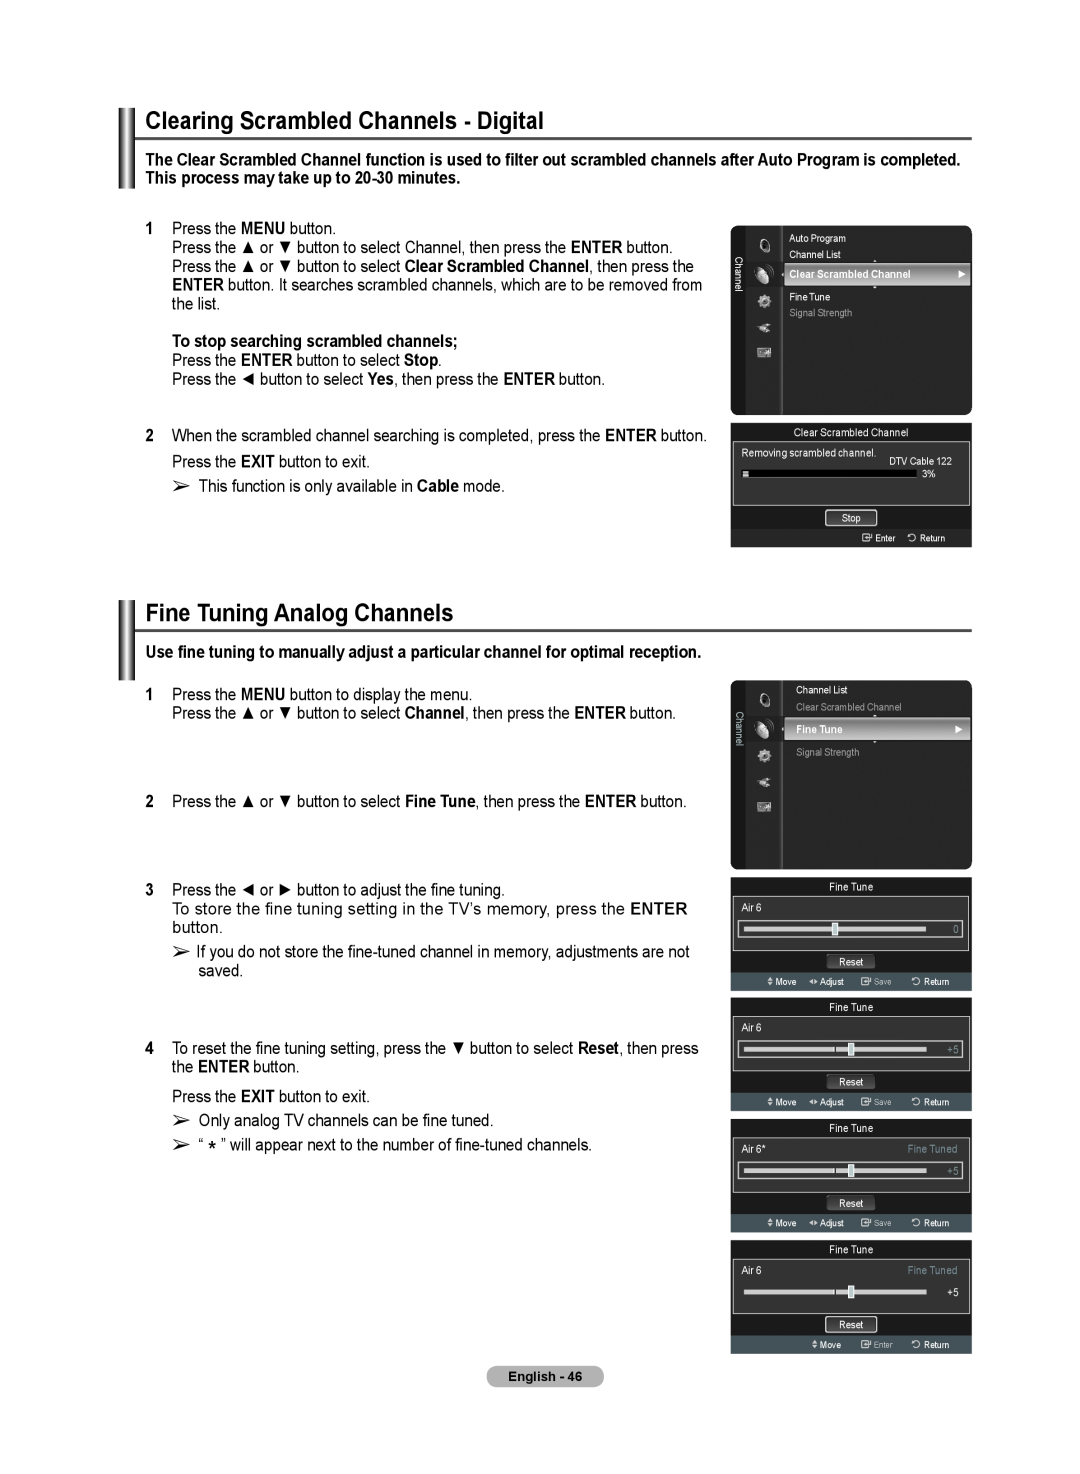 Samsung 510 user manual Clearing Scrambled Channels - Digital, Fine Tuning Analog Channels 